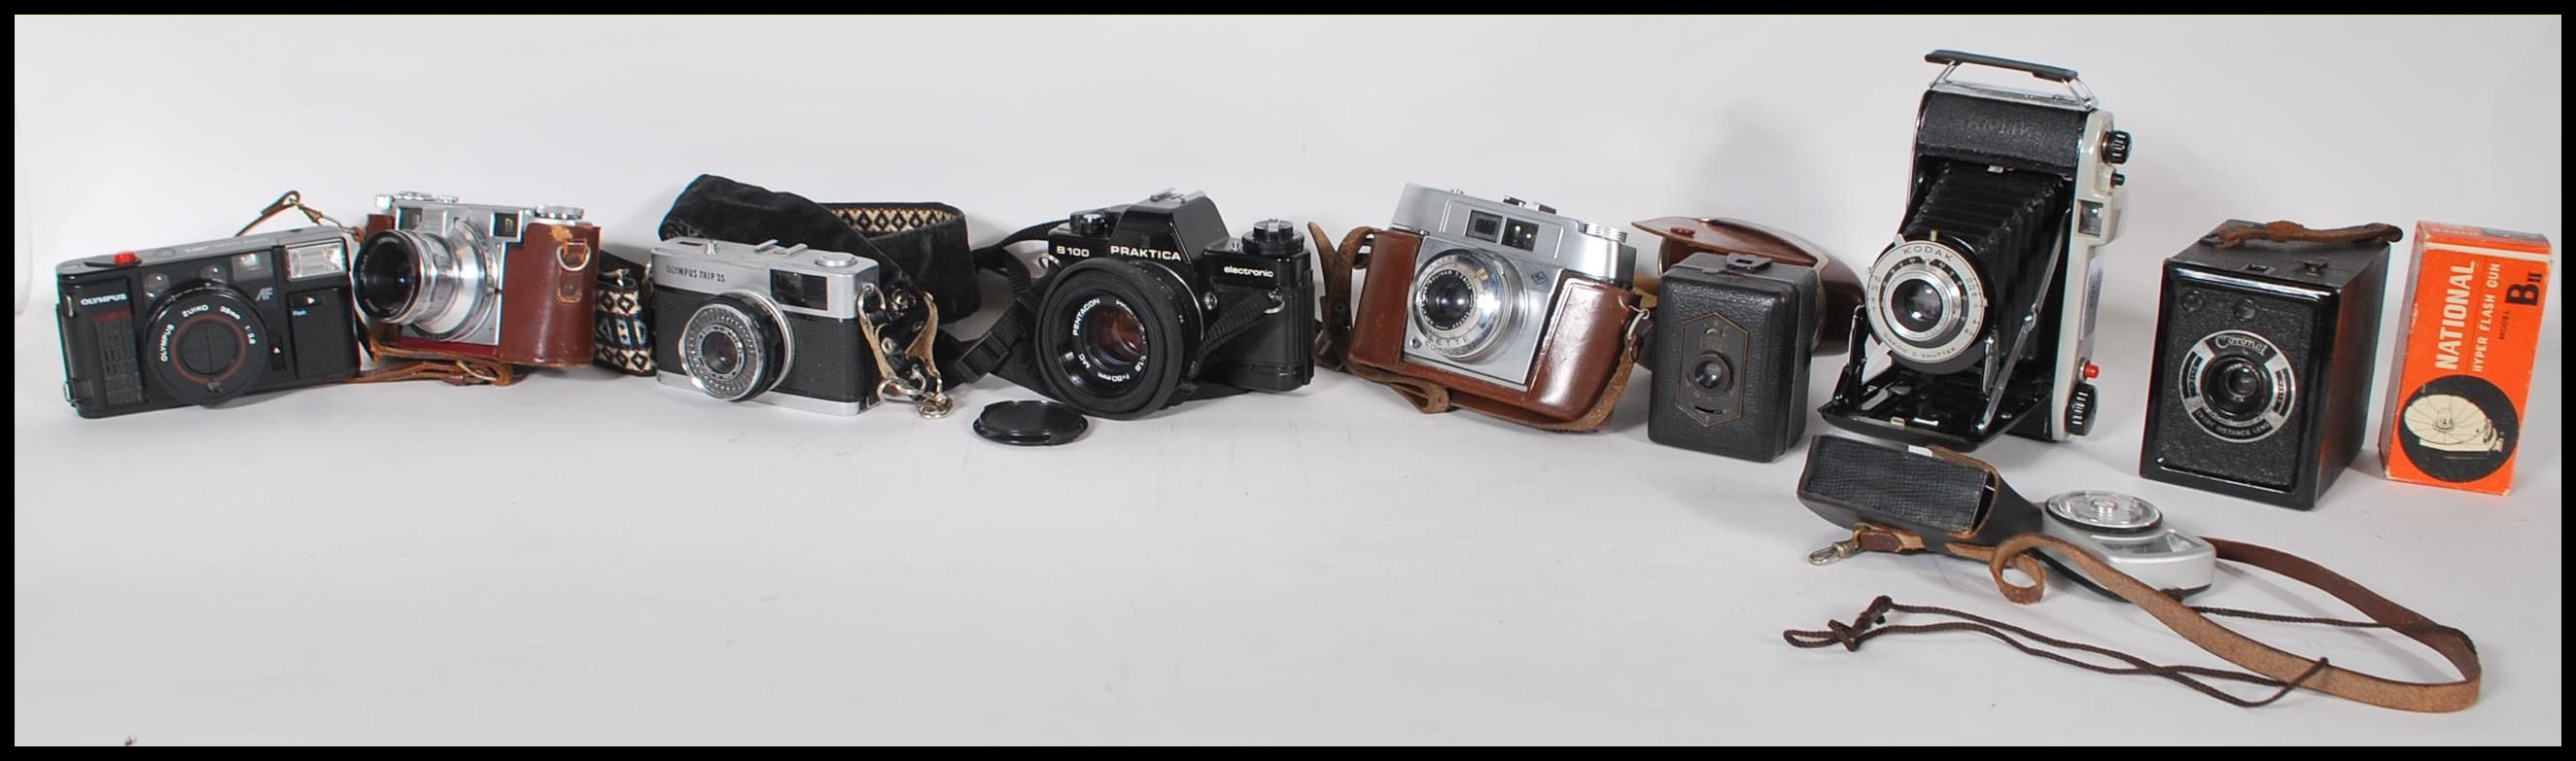 A collection of vintage film cameras to include a Praktica B100 film camera, an Olympus Quick